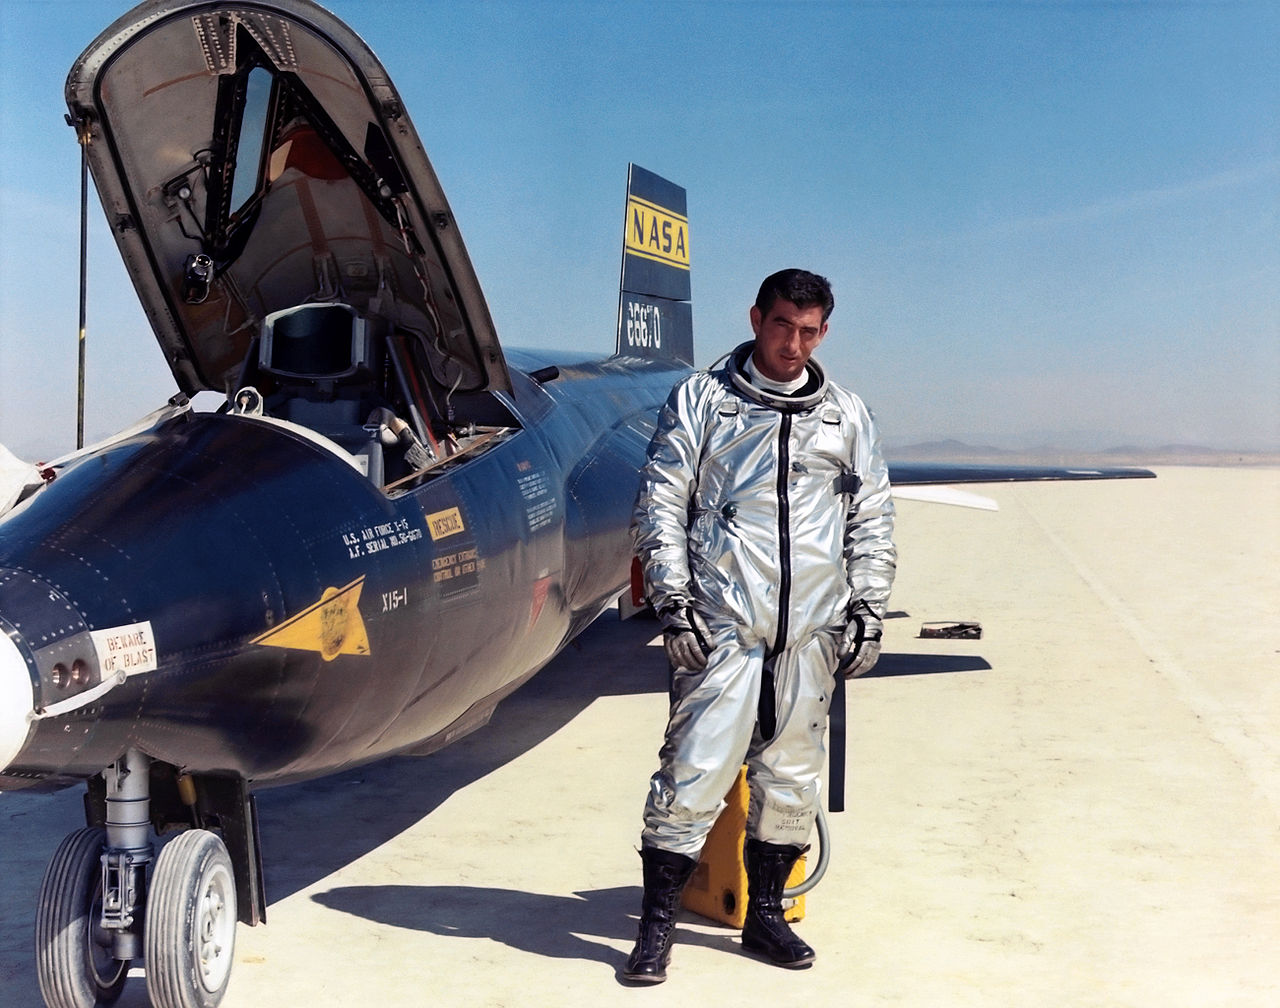 Major Michael J. Adams, United States Air Force, with an X-15 hypersonic research rocketplane on Rogers Dry Lake. (NASA)